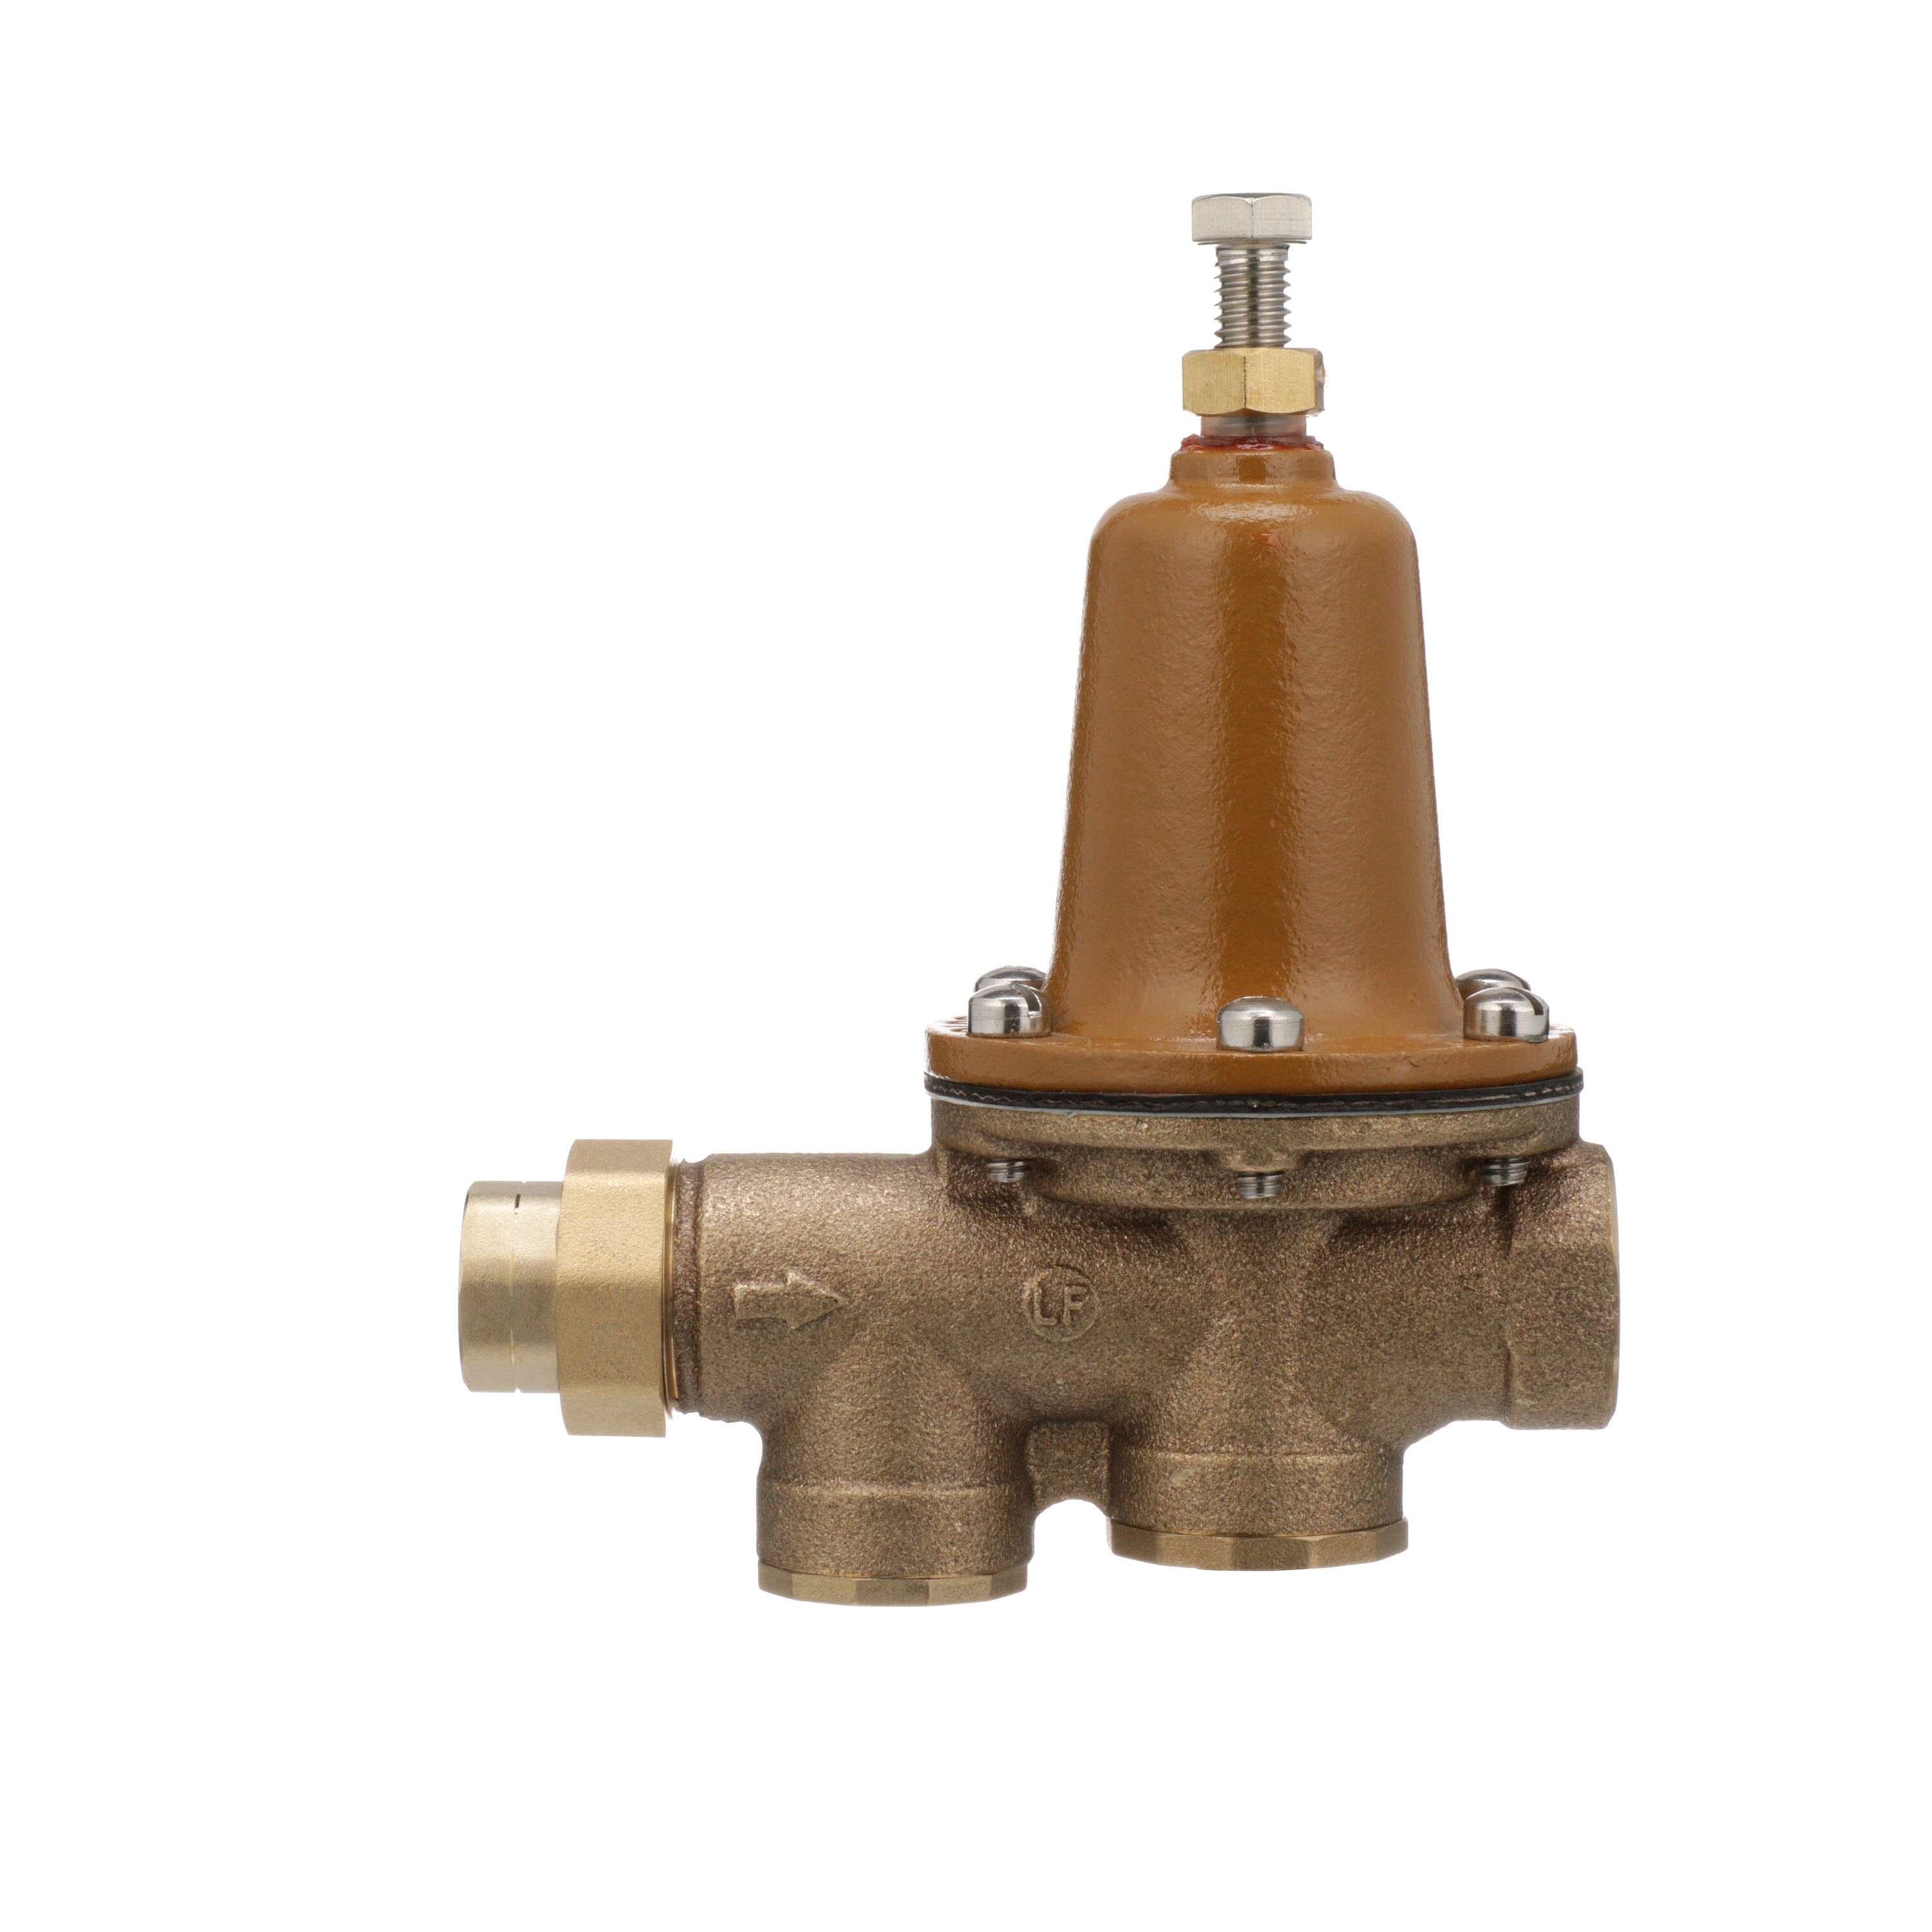 WATTS® 0009217 LF25AUB Pressure Reducing Valve, 1/2 in Nominal, FNPT Union x FNPT End Style, 25 to 75 psi Pressure, Cast Copper Silicon Alloy Body